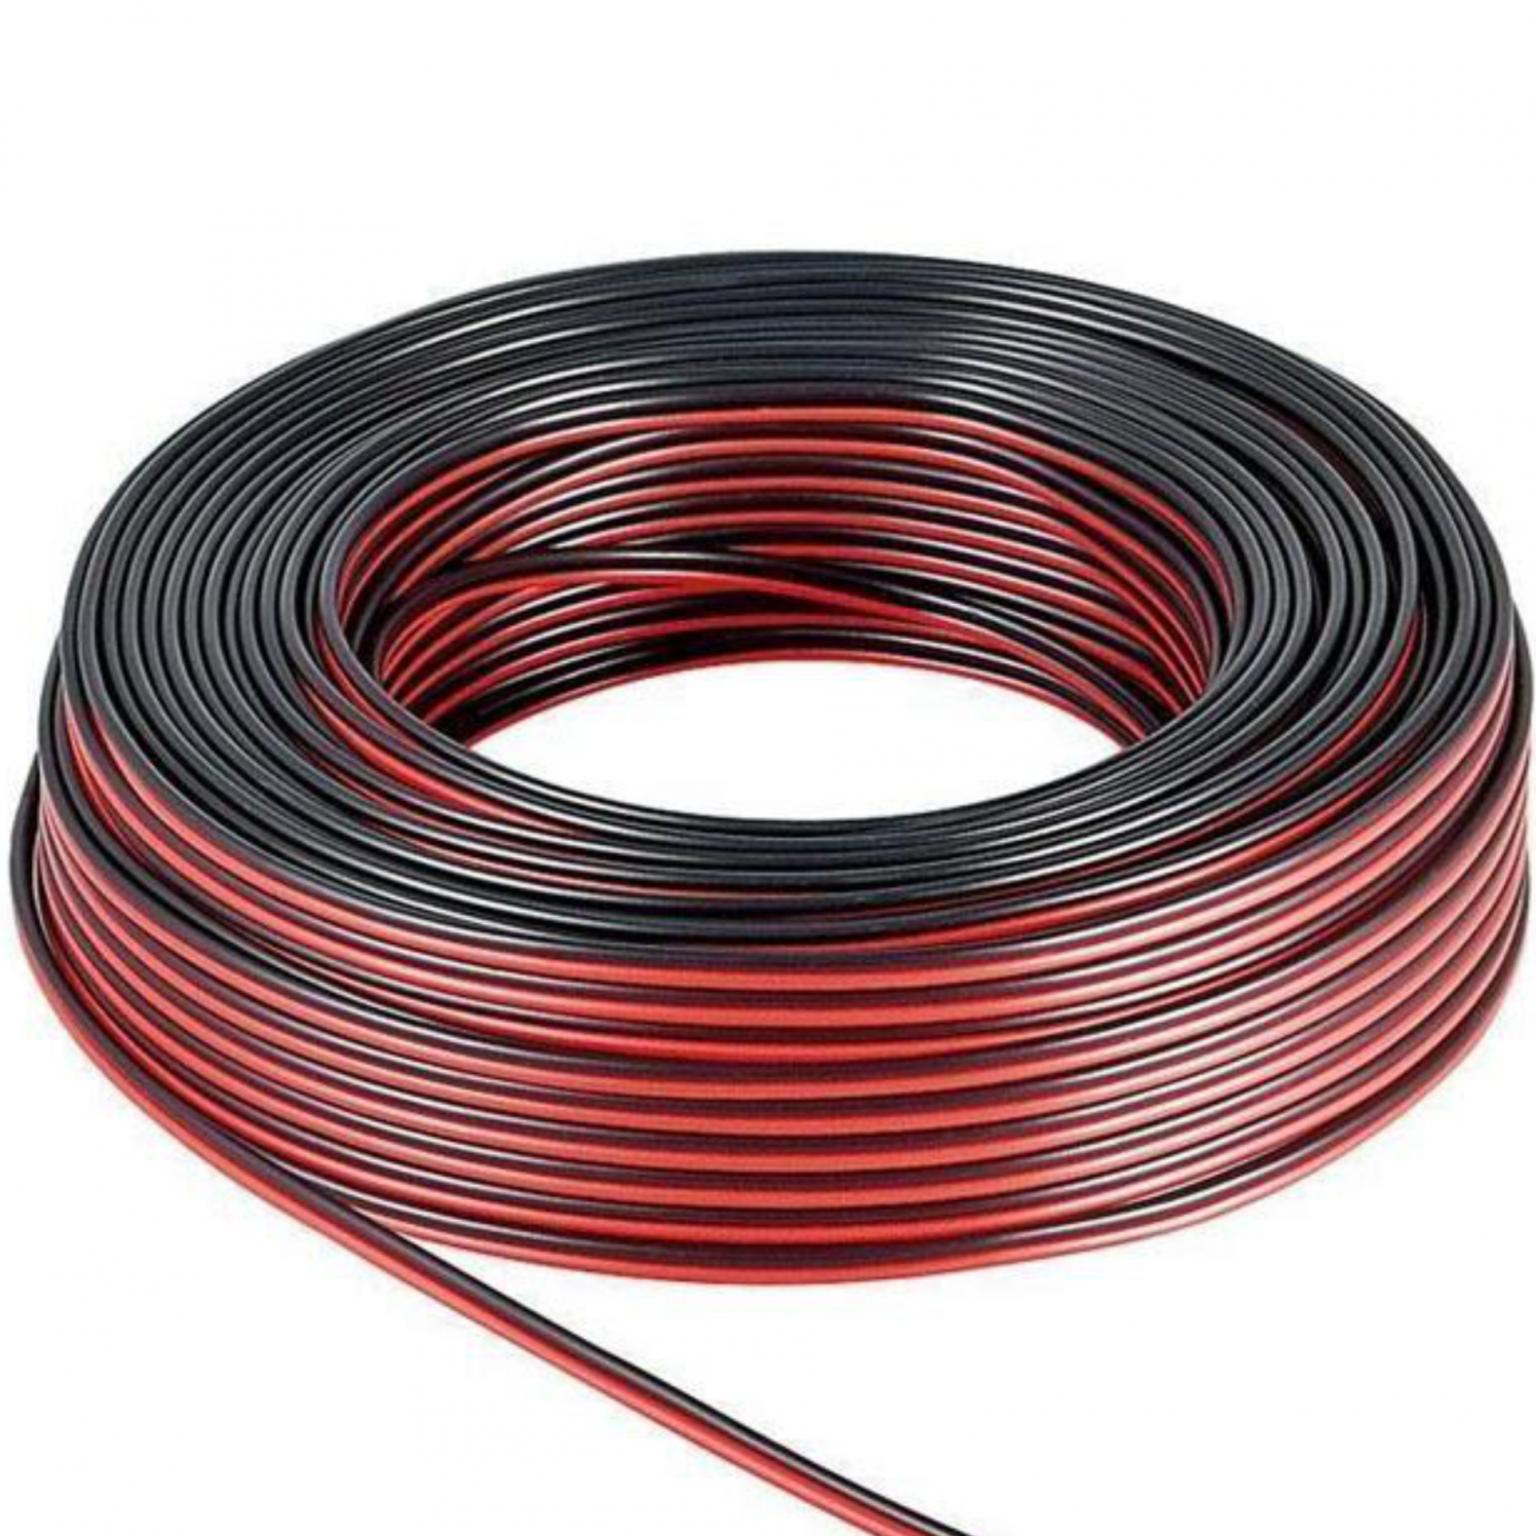 Image of Loudspeaker cable red/black CCA 10 m roll, cable diameter 2 x 0,75 mm?